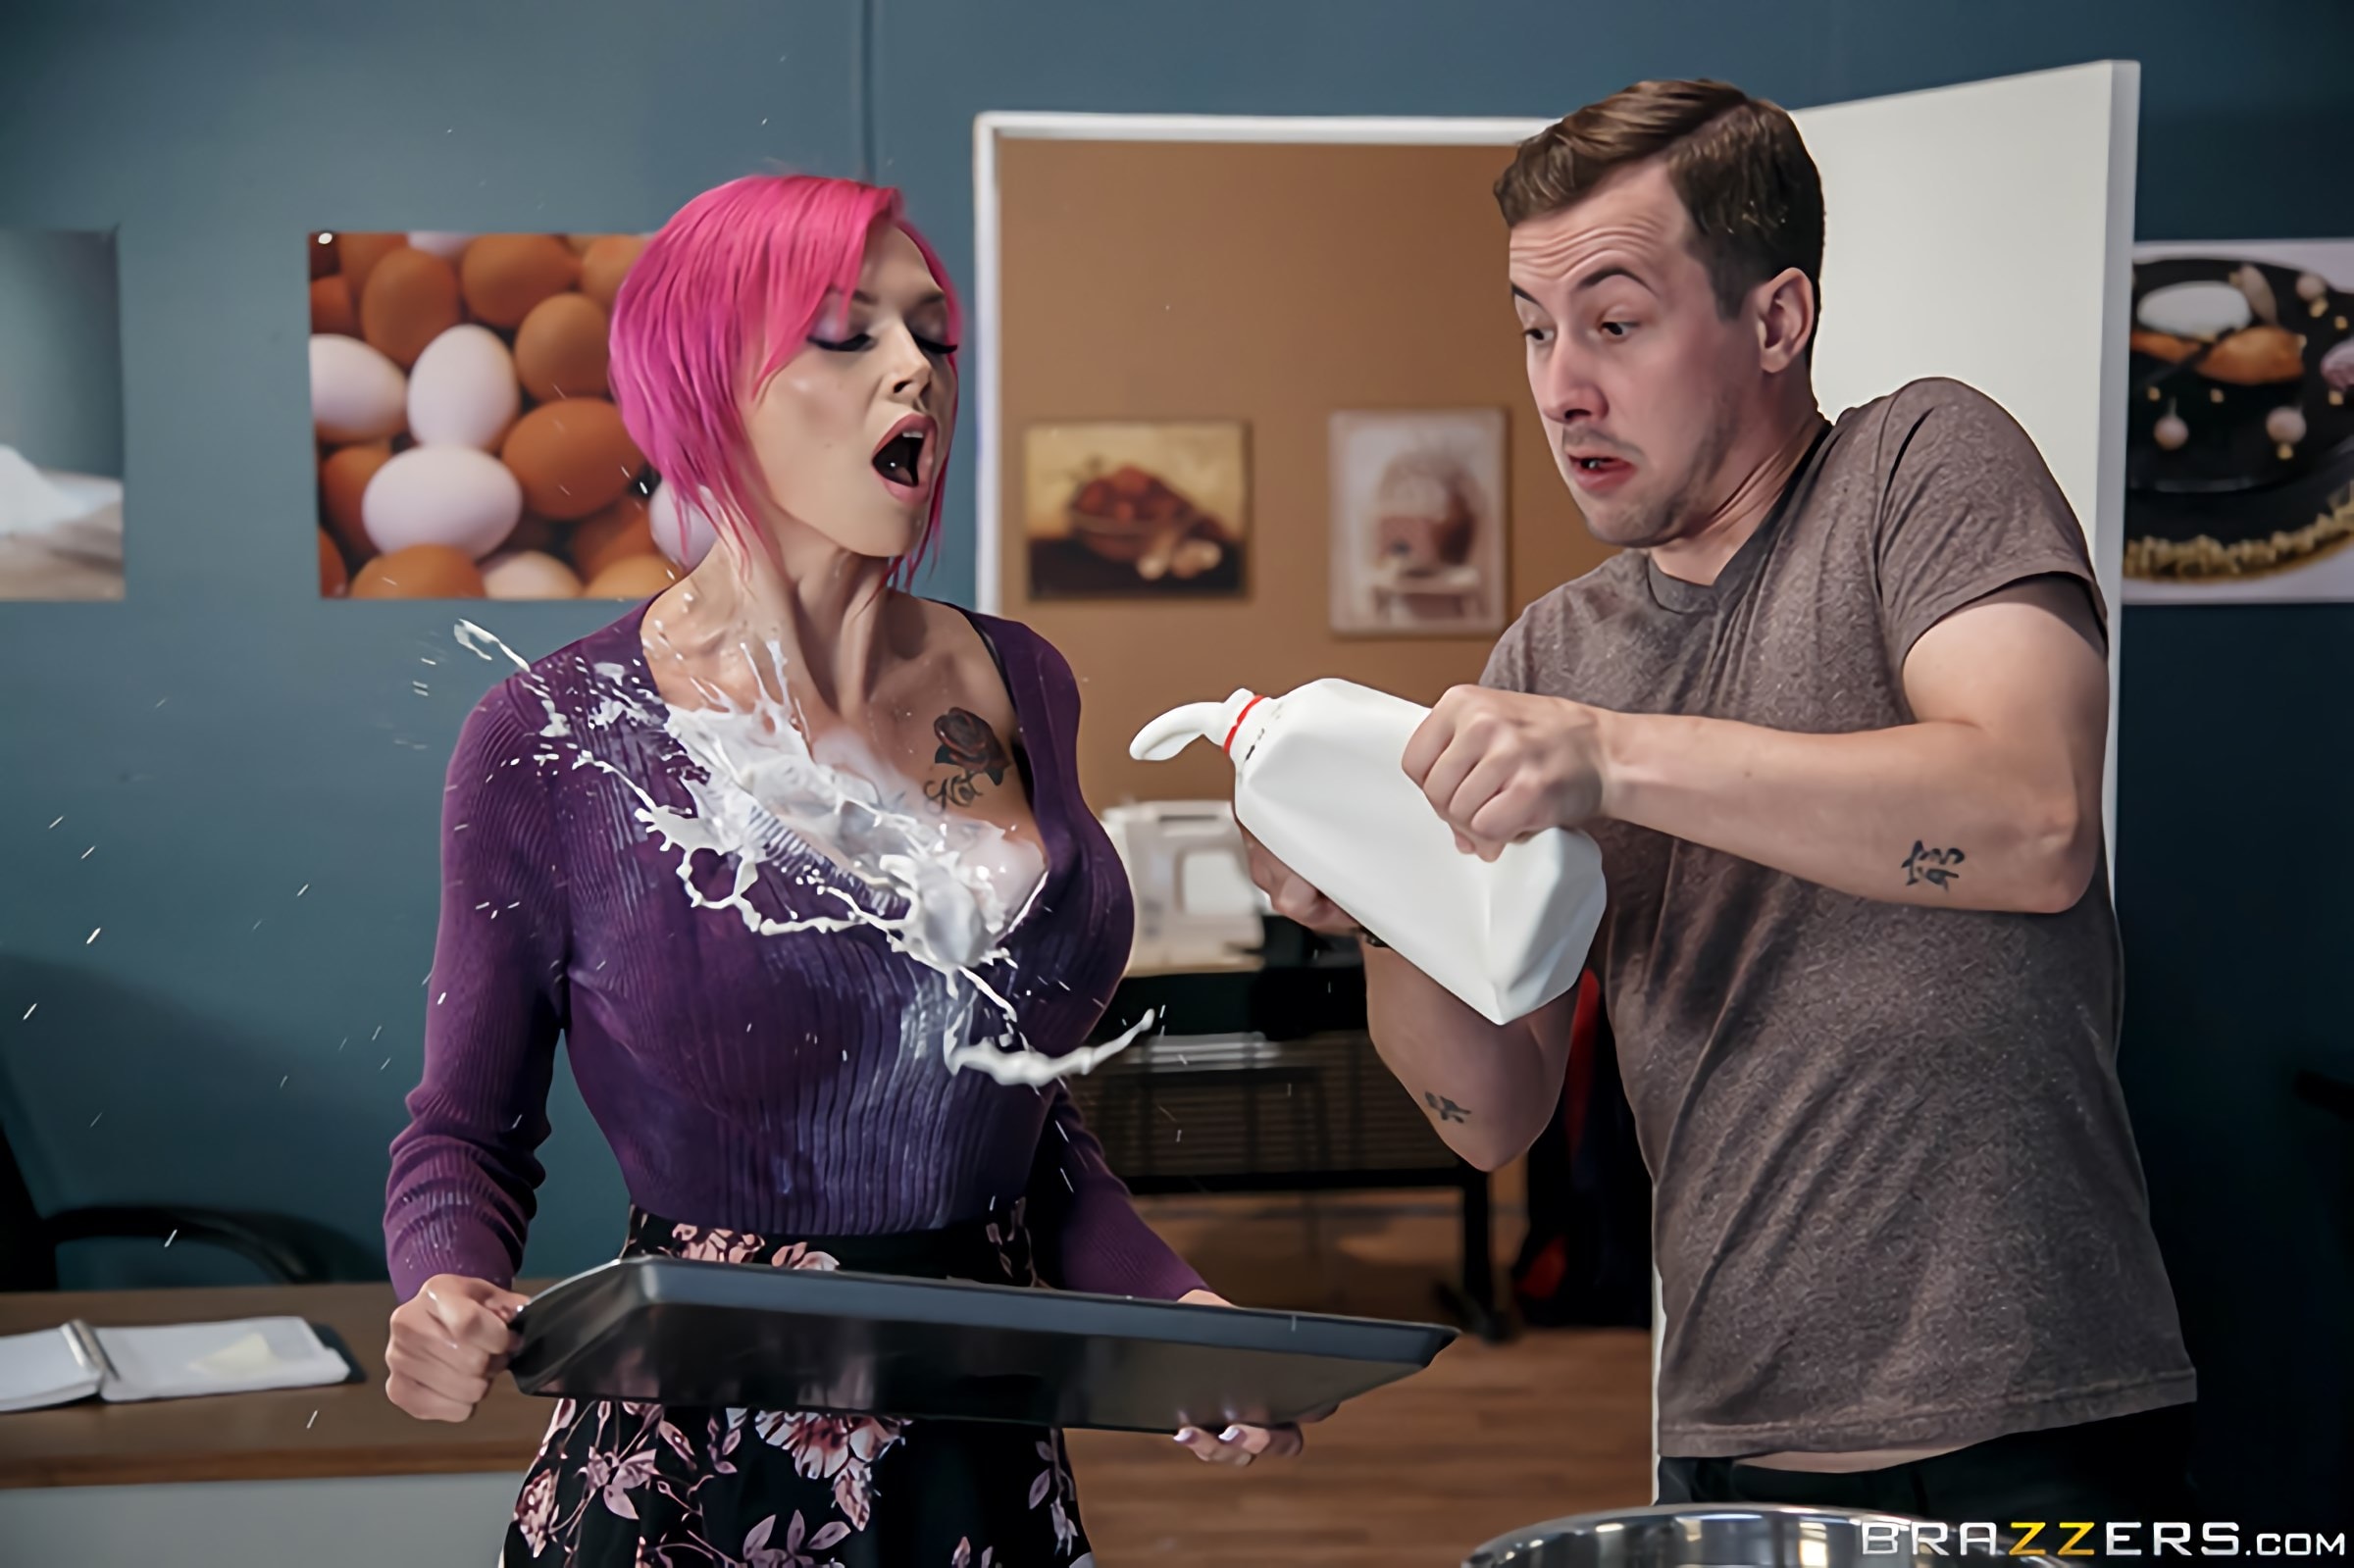 Brazzers 'Lets Bake A Titty Cake' starring Anna Bell Peaks (Photo 1)